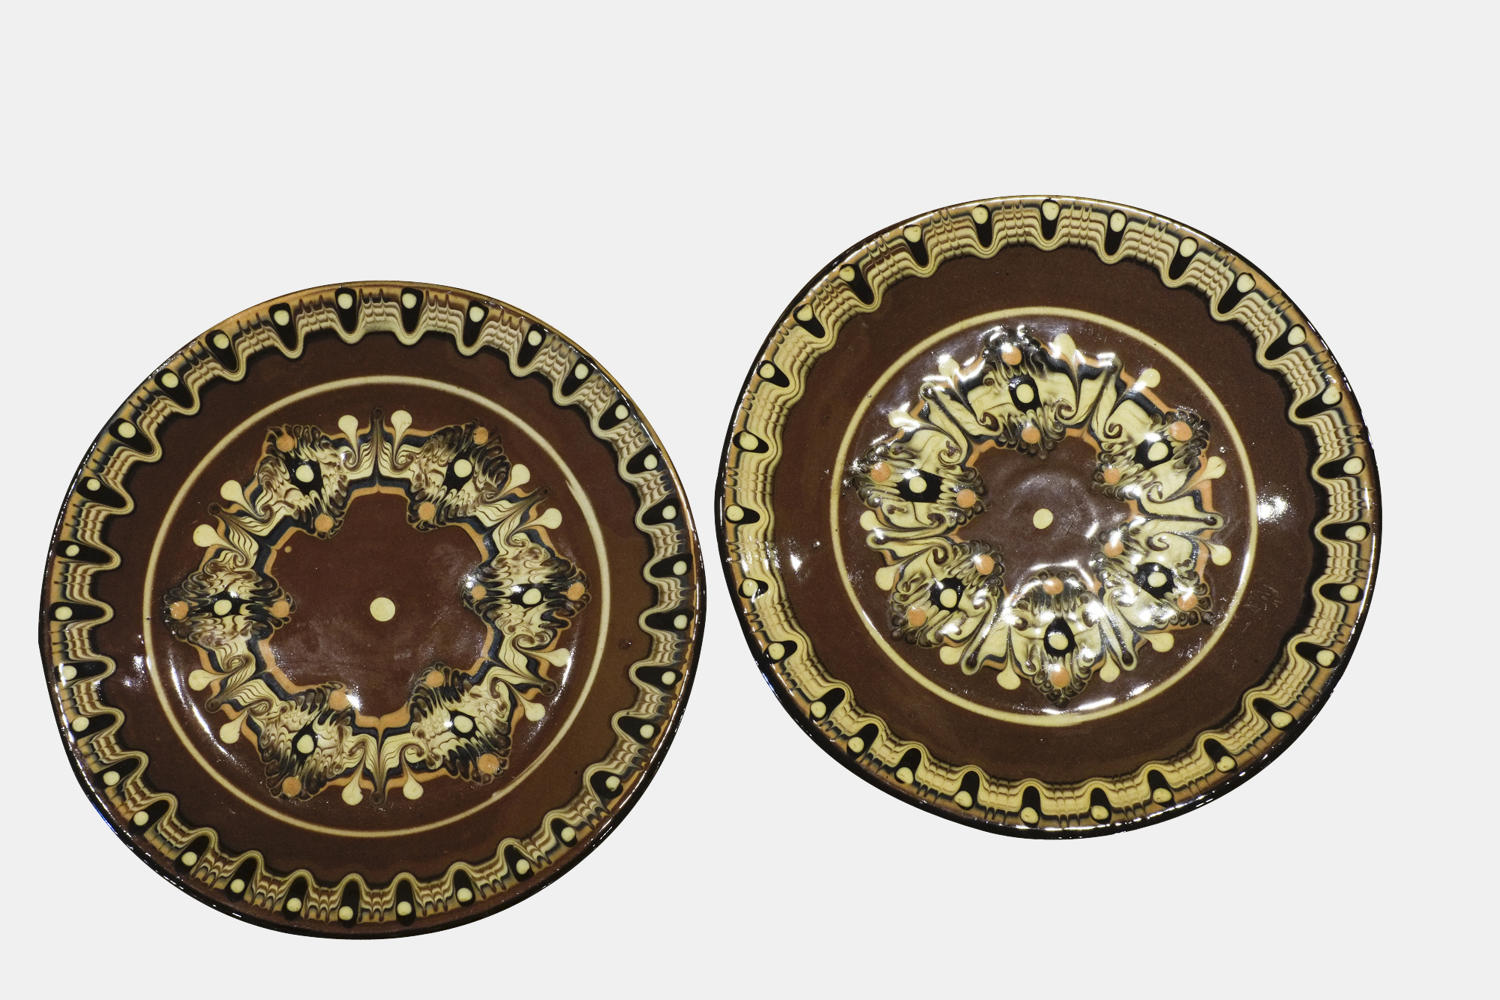 Pair of marbled plates